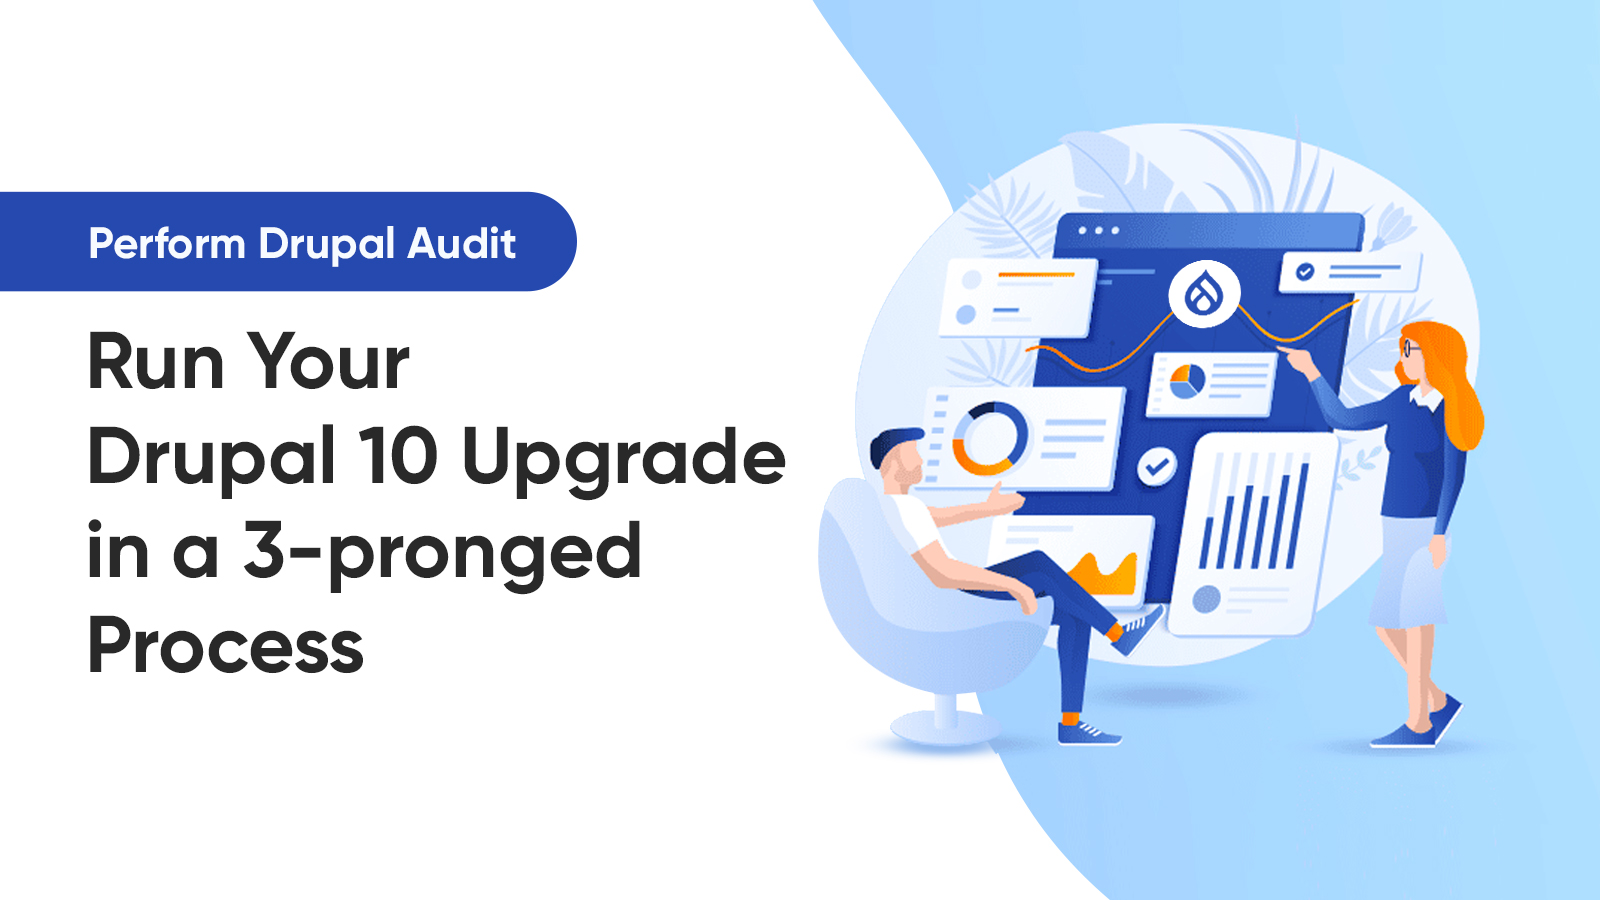 Perform Drupal audit and Run Your Drupal 10 Upgrade in a 3-pronged Process